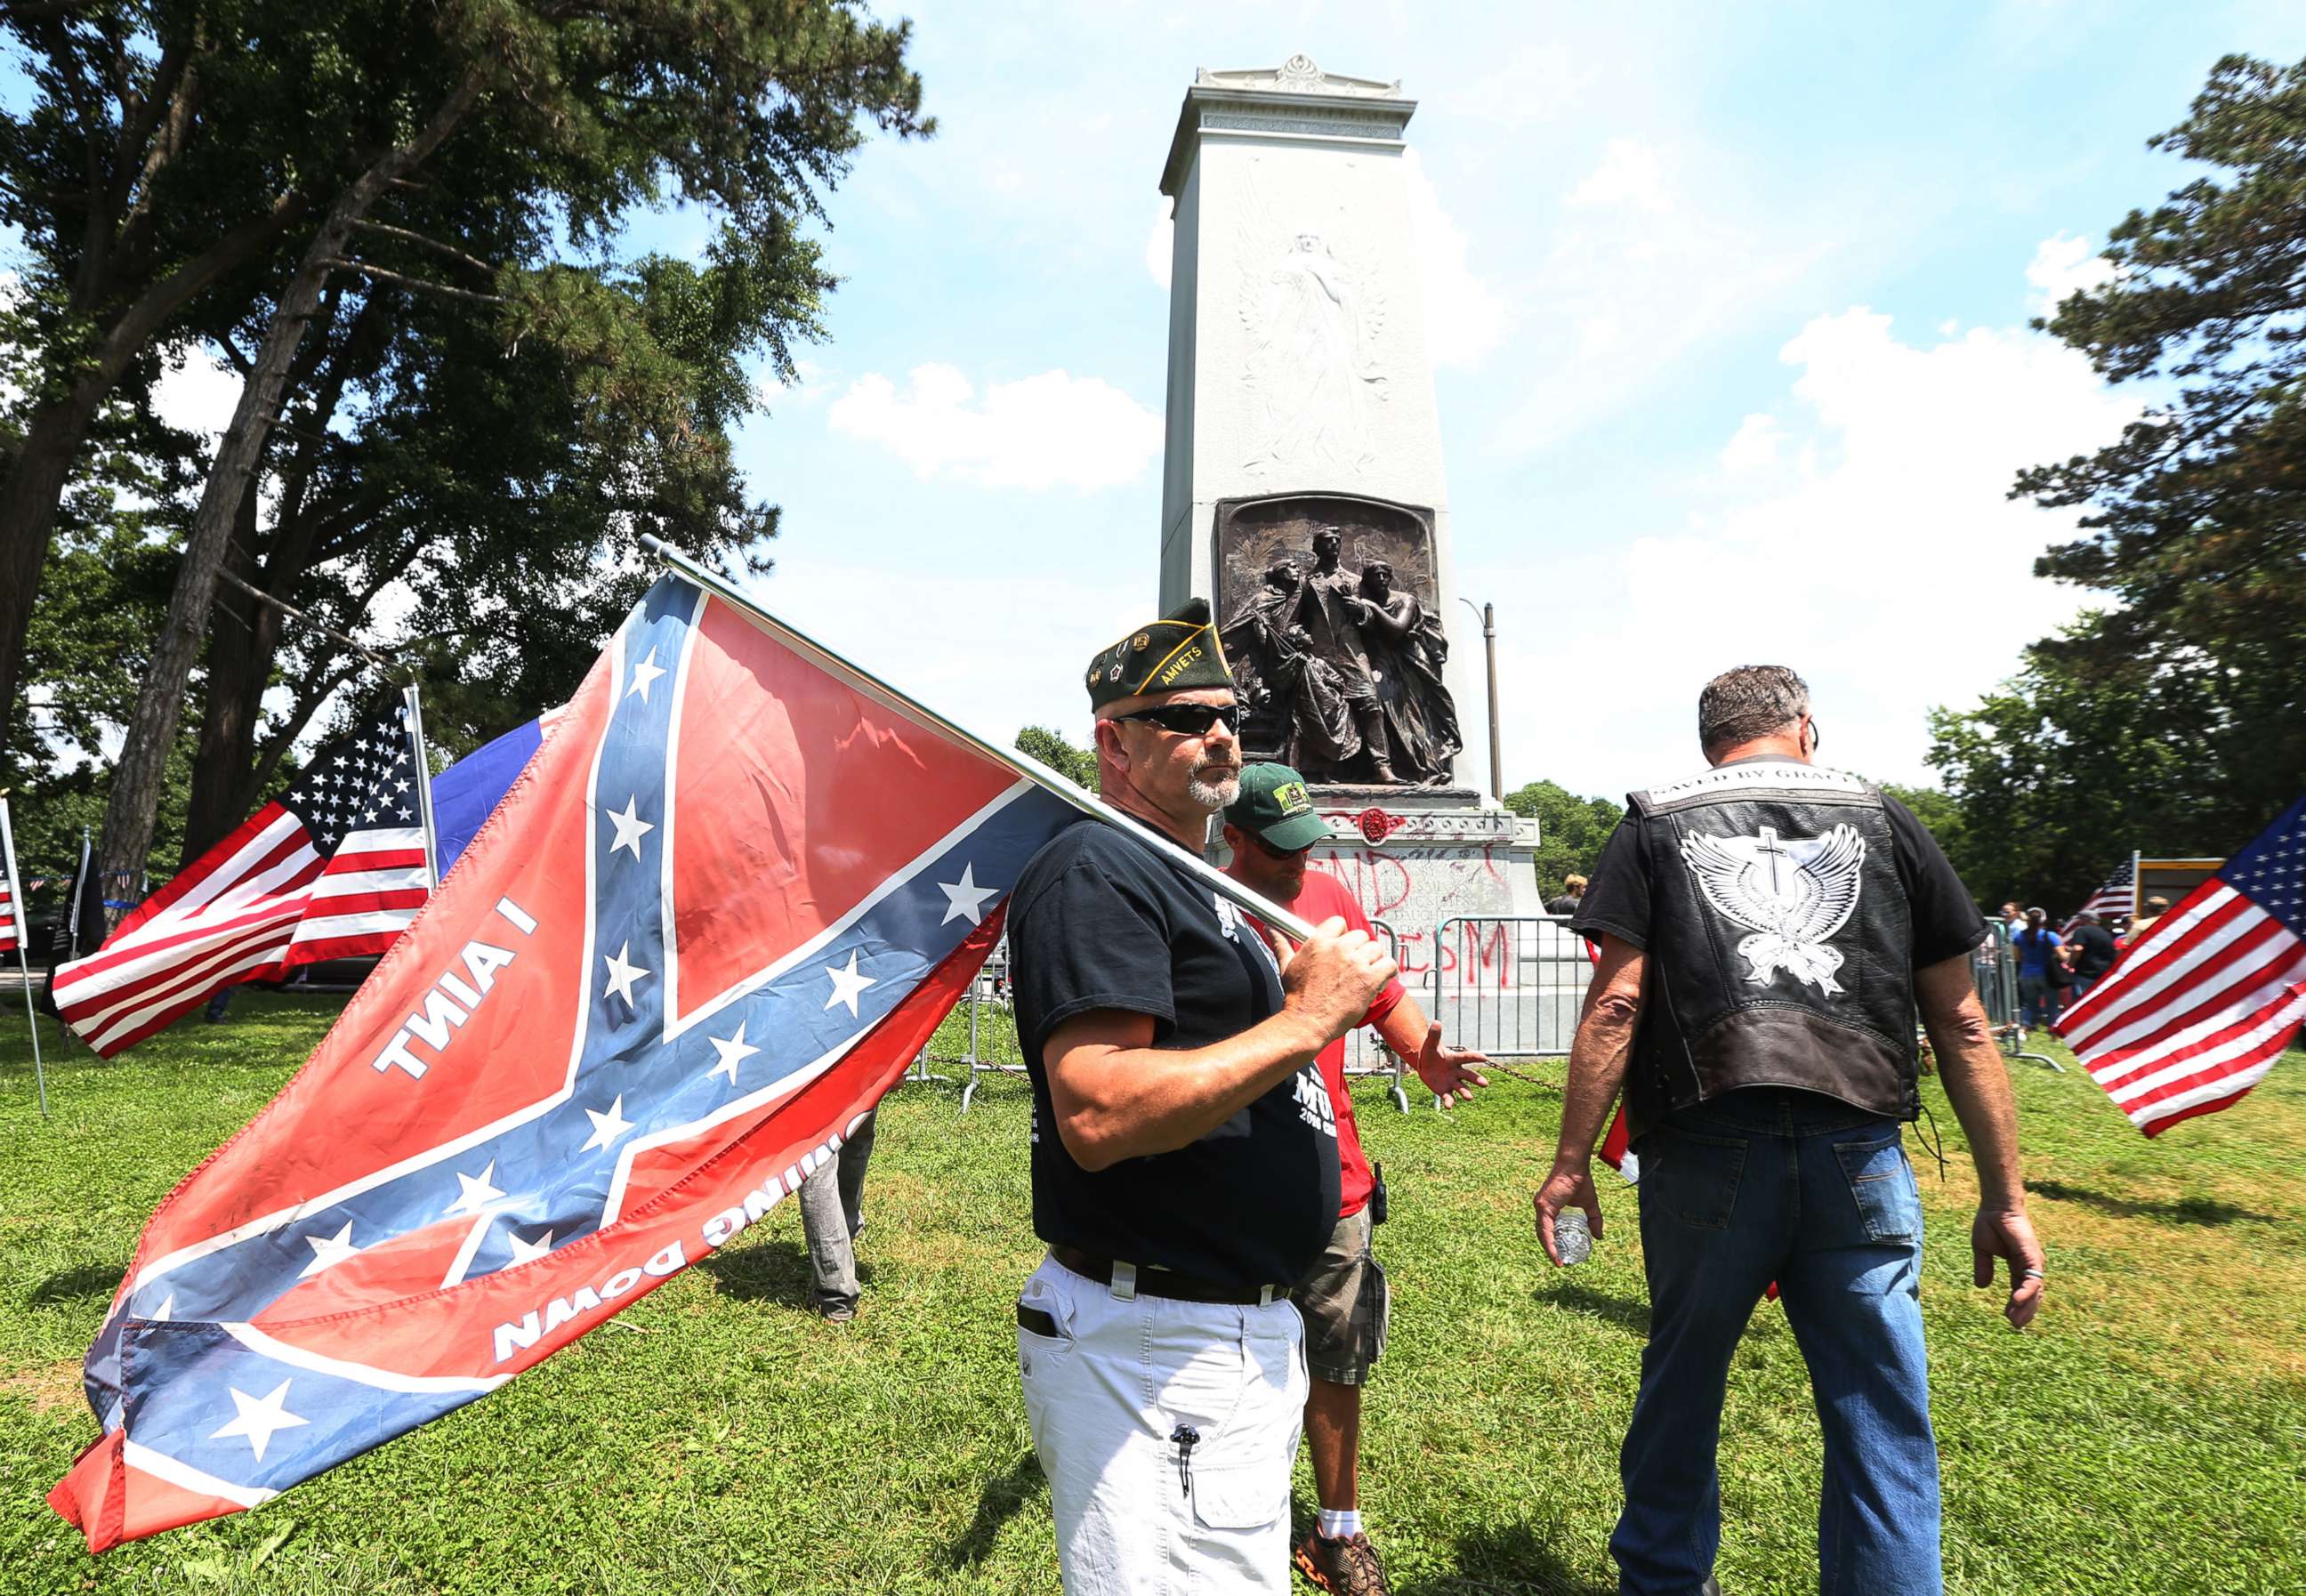 PHOTO: Steve Stepanek of St. Louis waves a Confederate flag at the Confederate monument in Forest Park on June 3, 2017 in St. Louis.